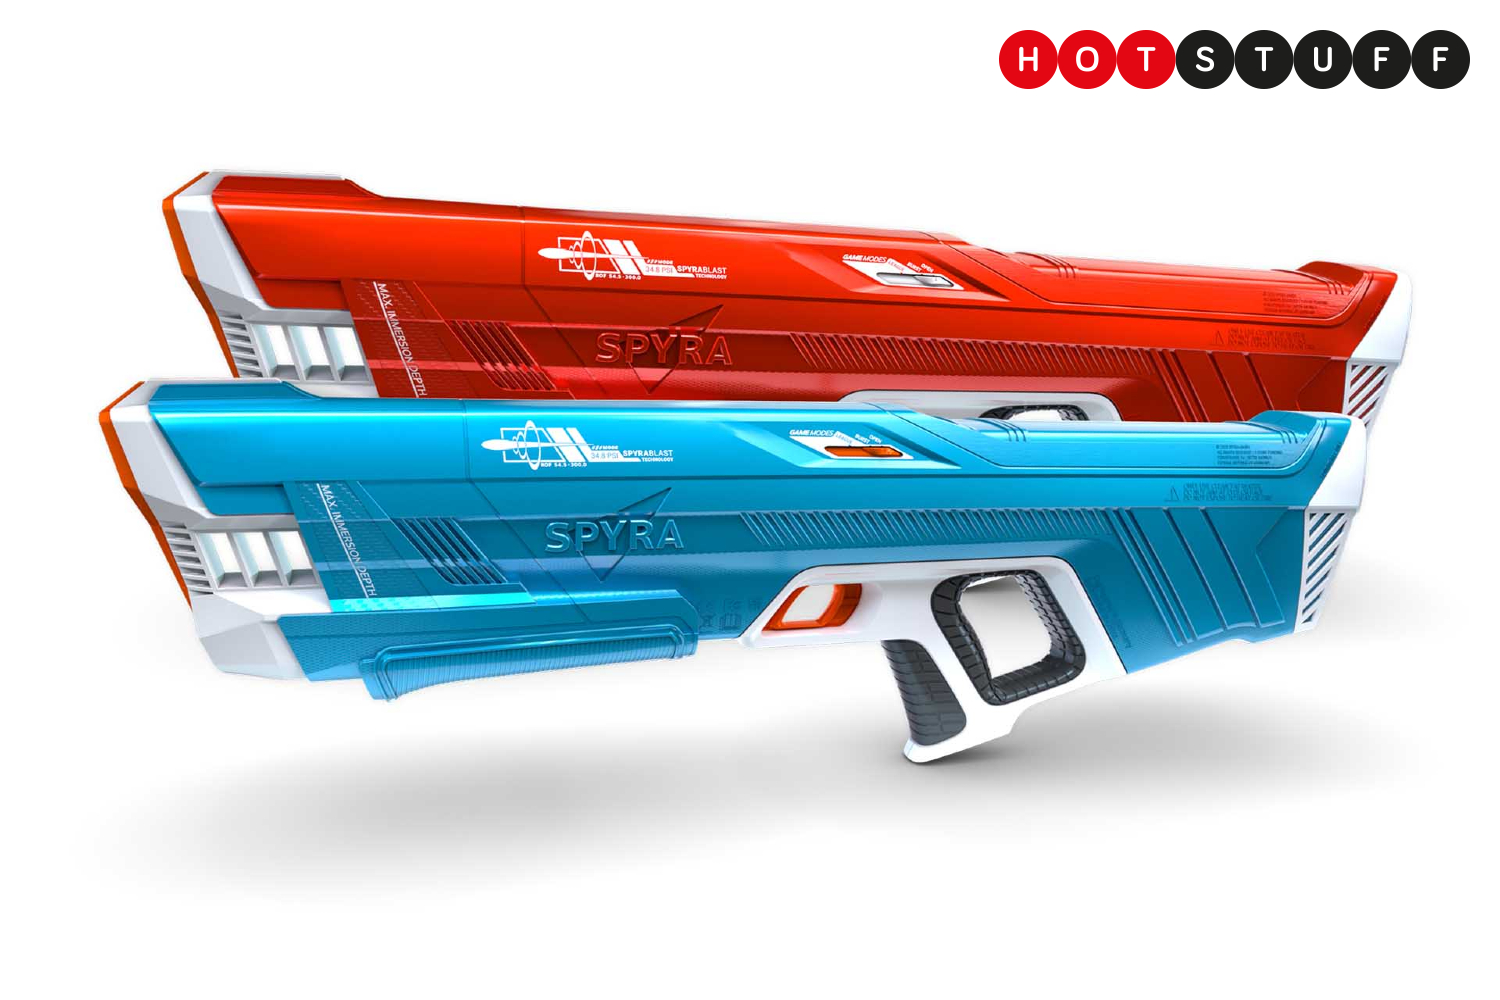 SpyraThree electric water blaster review: The best water gun for adults 